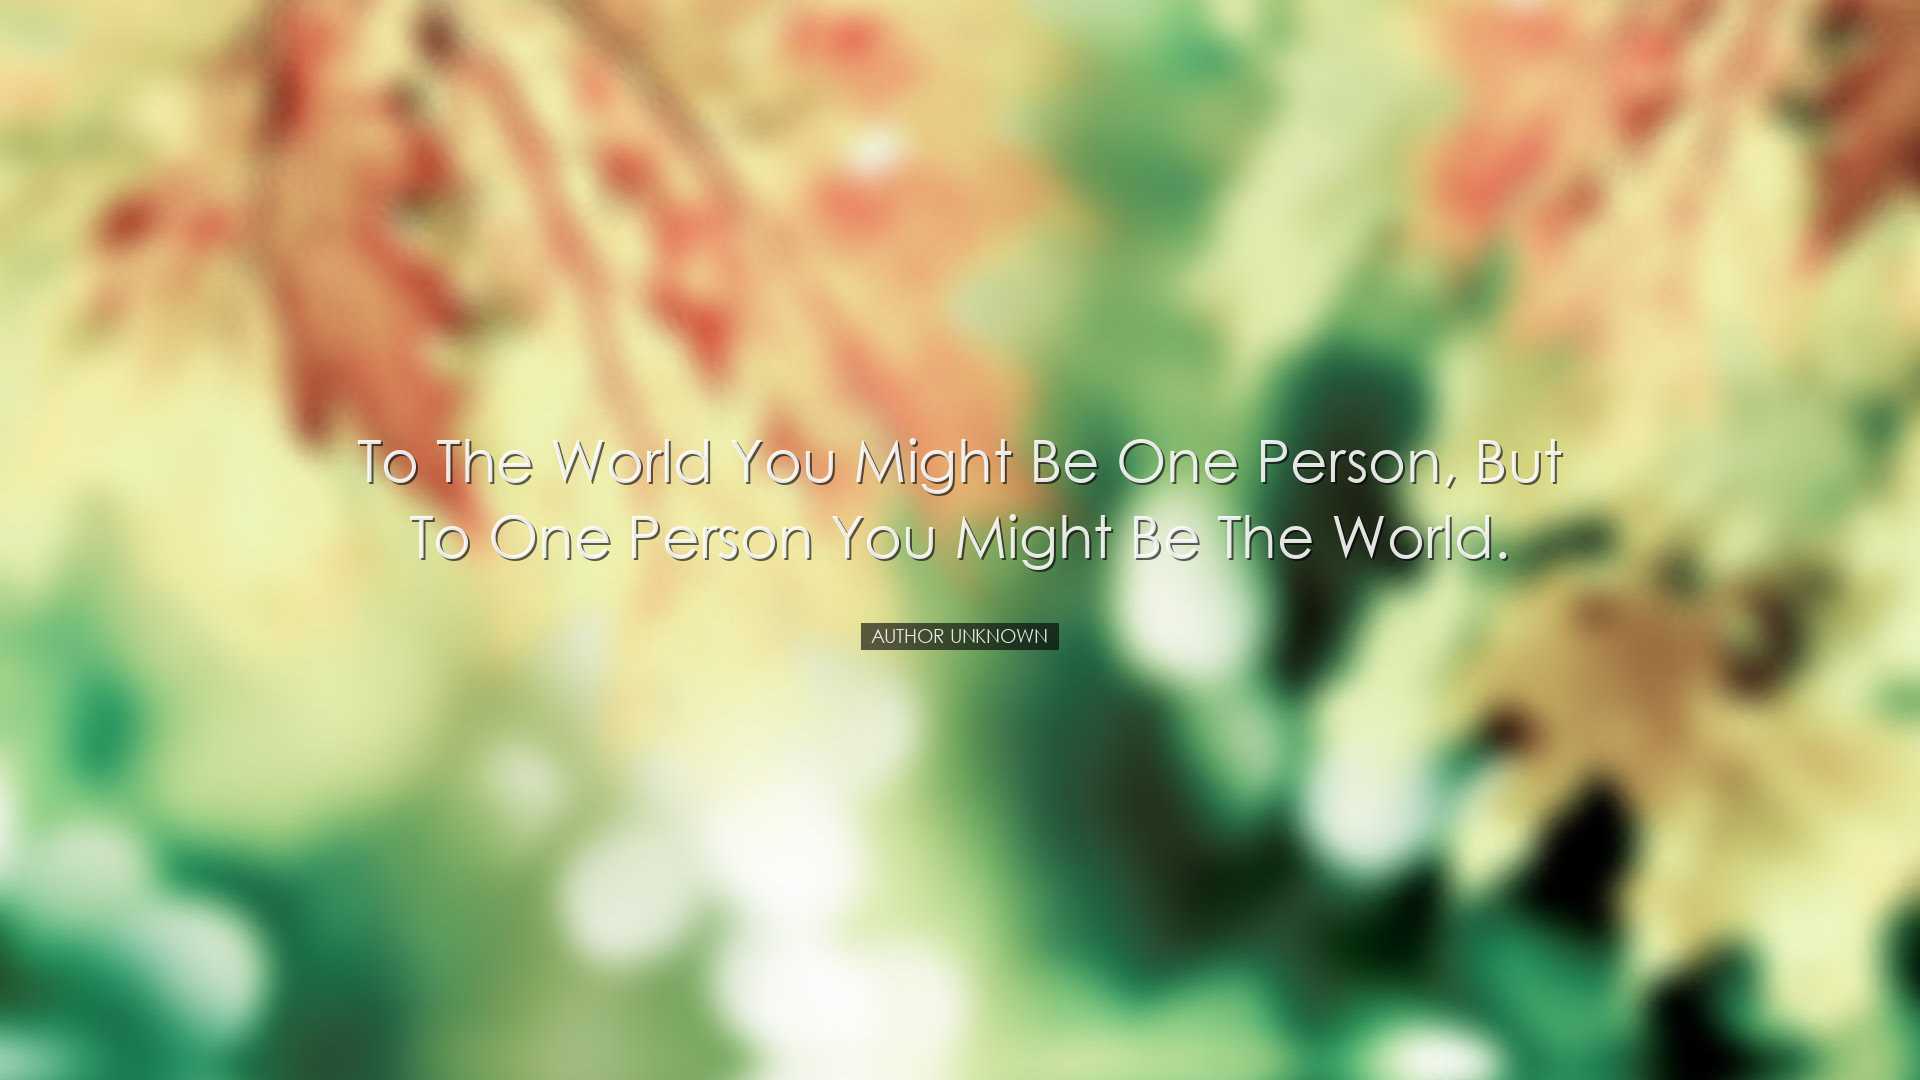 To the world you might be one person, but to one person you might